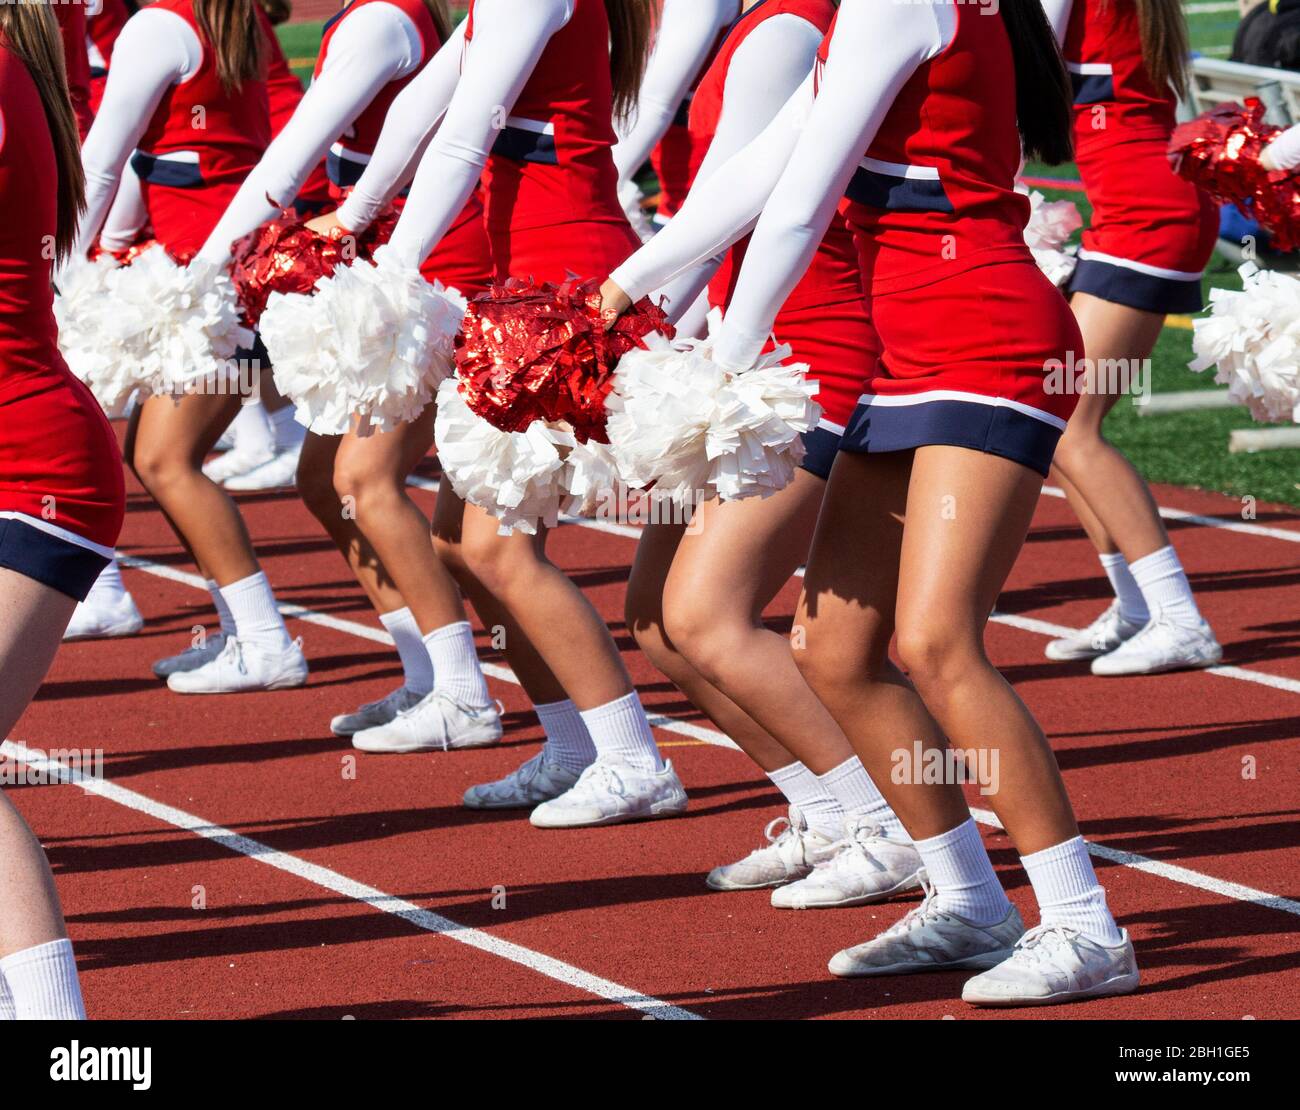 High school cheerleaders standing on a red track performing a routine with red and white pom poms. Stock Photo